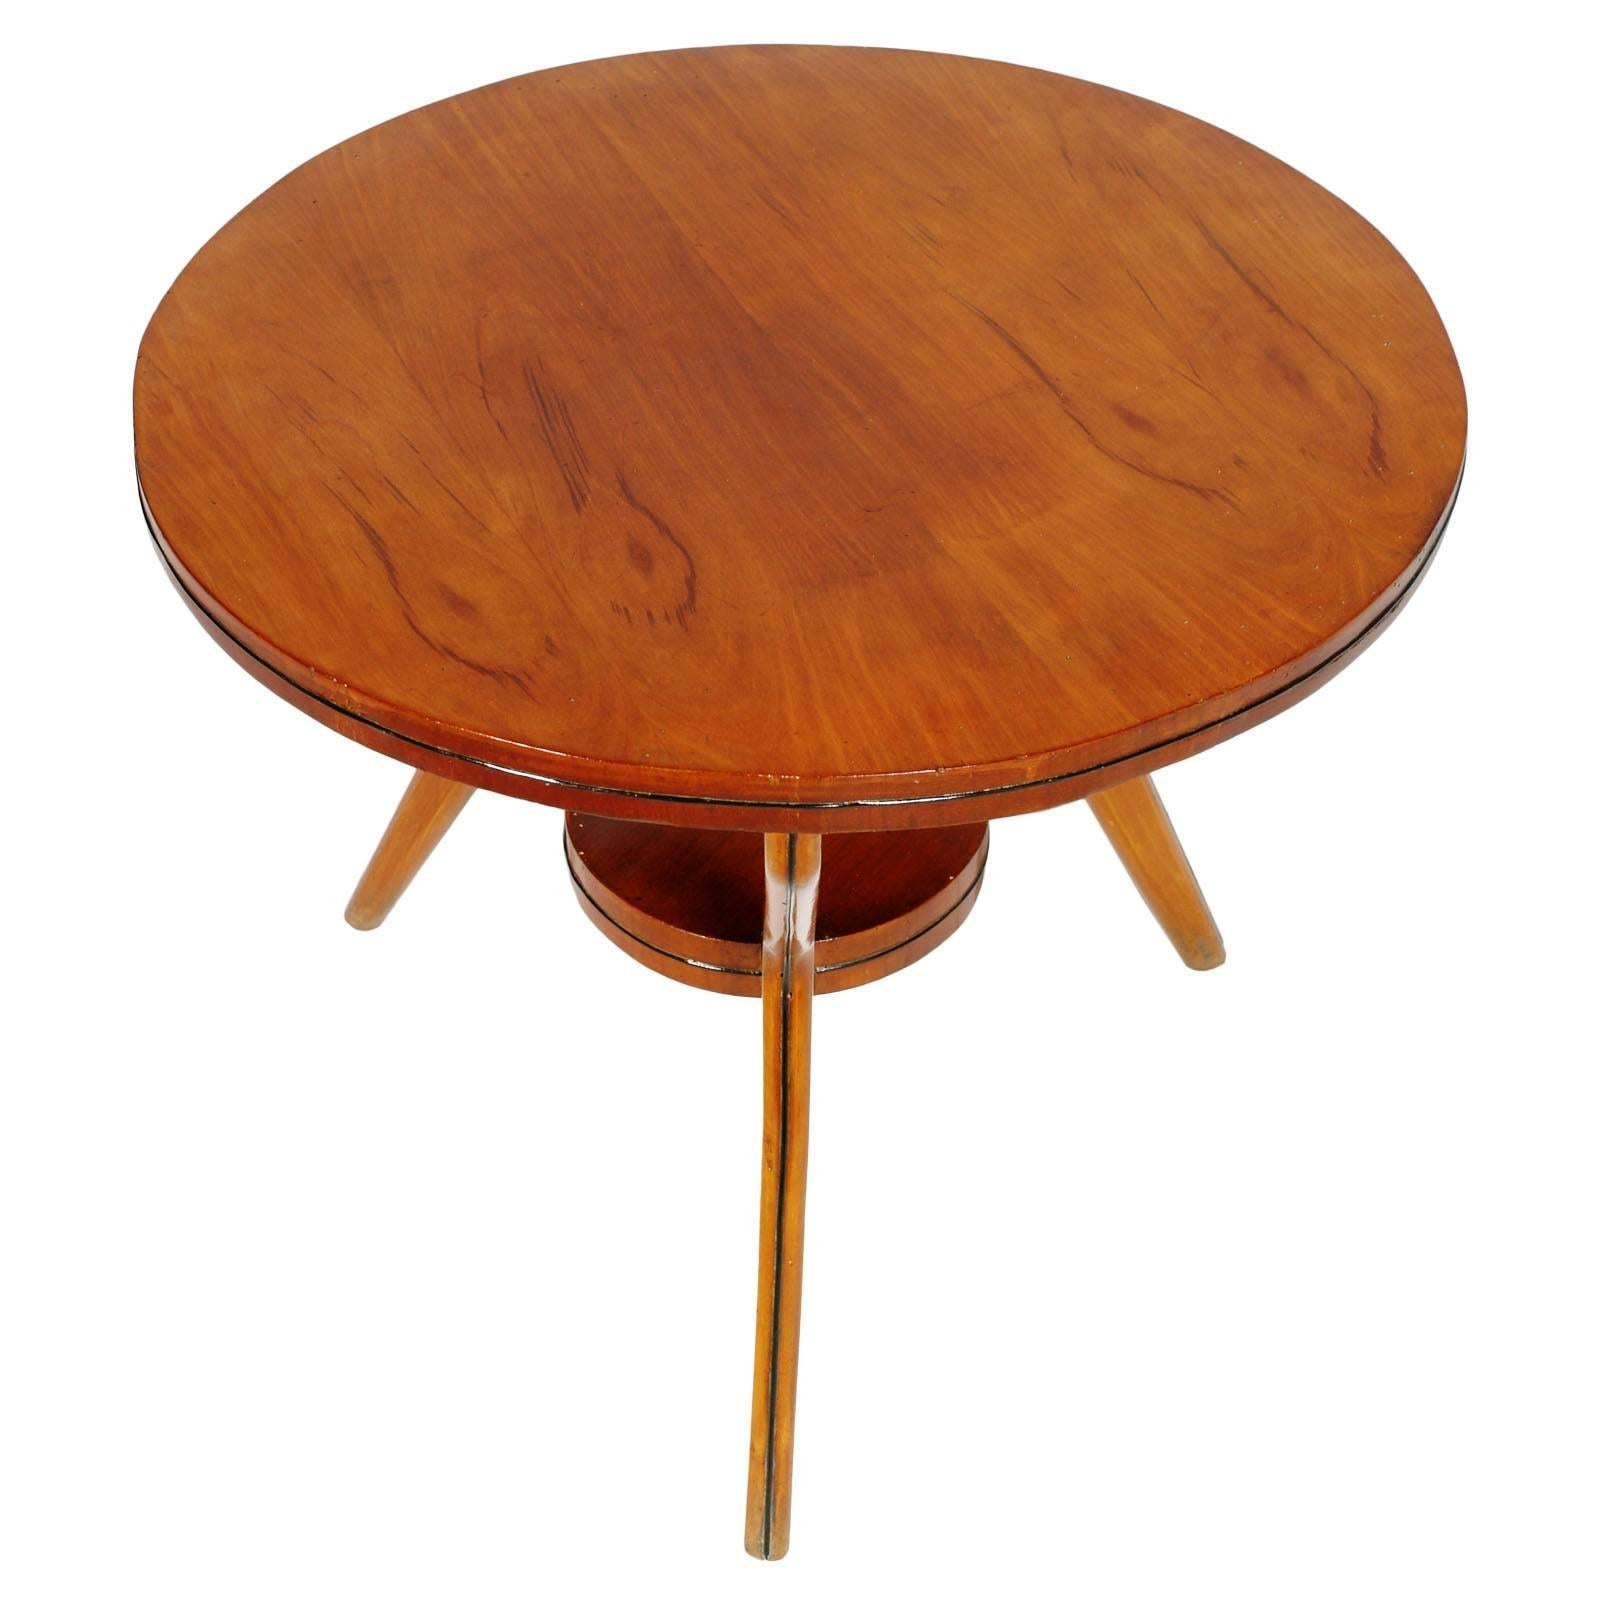 1950s midcentury coffee table, Permanente Mobili di Cantu , Ico Parisi attributed in walnut and beechwood, wax-polished.

Measures cm: height 50, diameter 60 (H shelves 25cm).